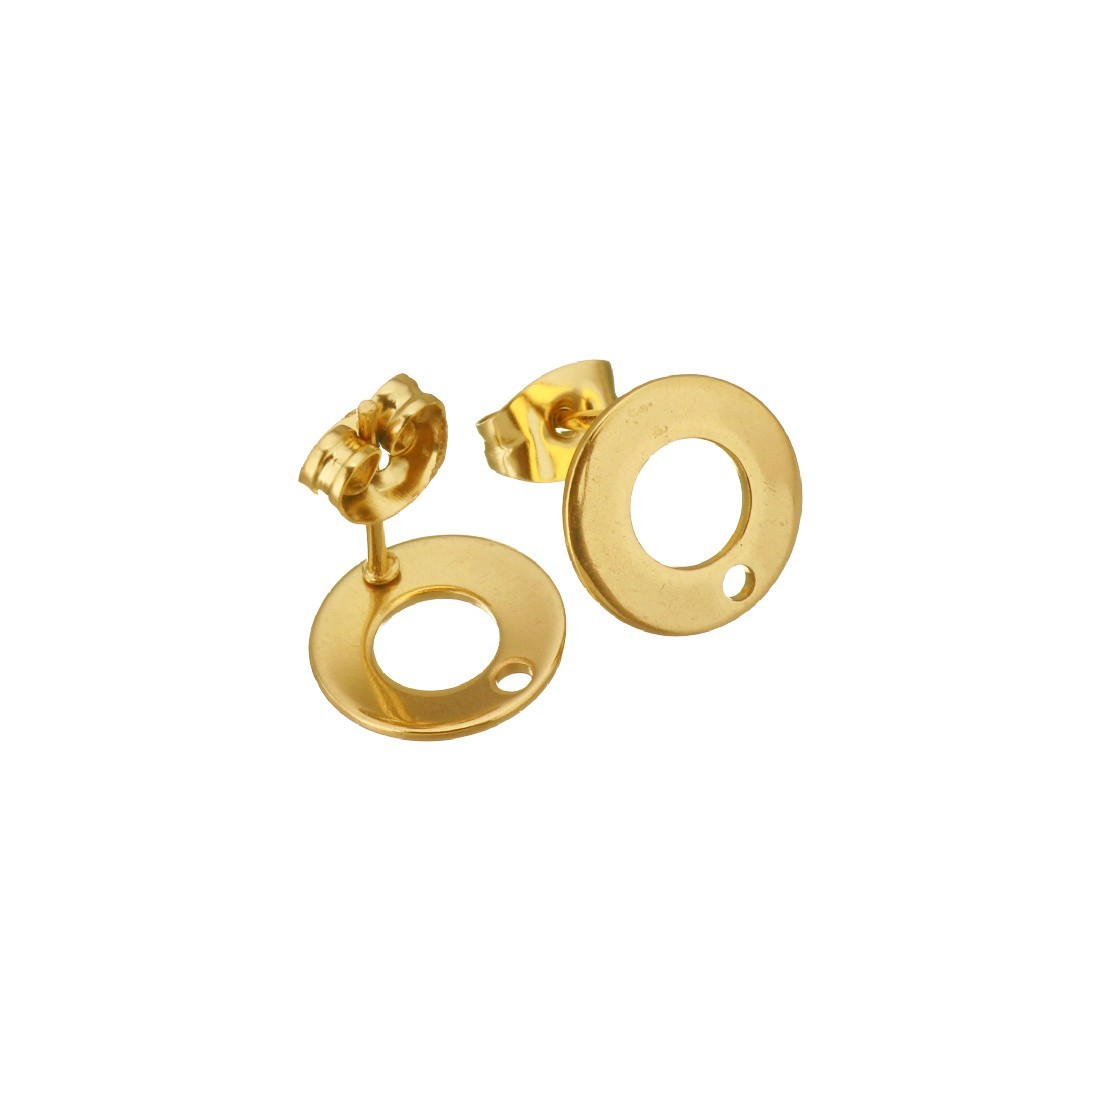 Studs 10mm with a hole and ribs/ surgical steel/ gold/ 2pcs BKSCH35KG01